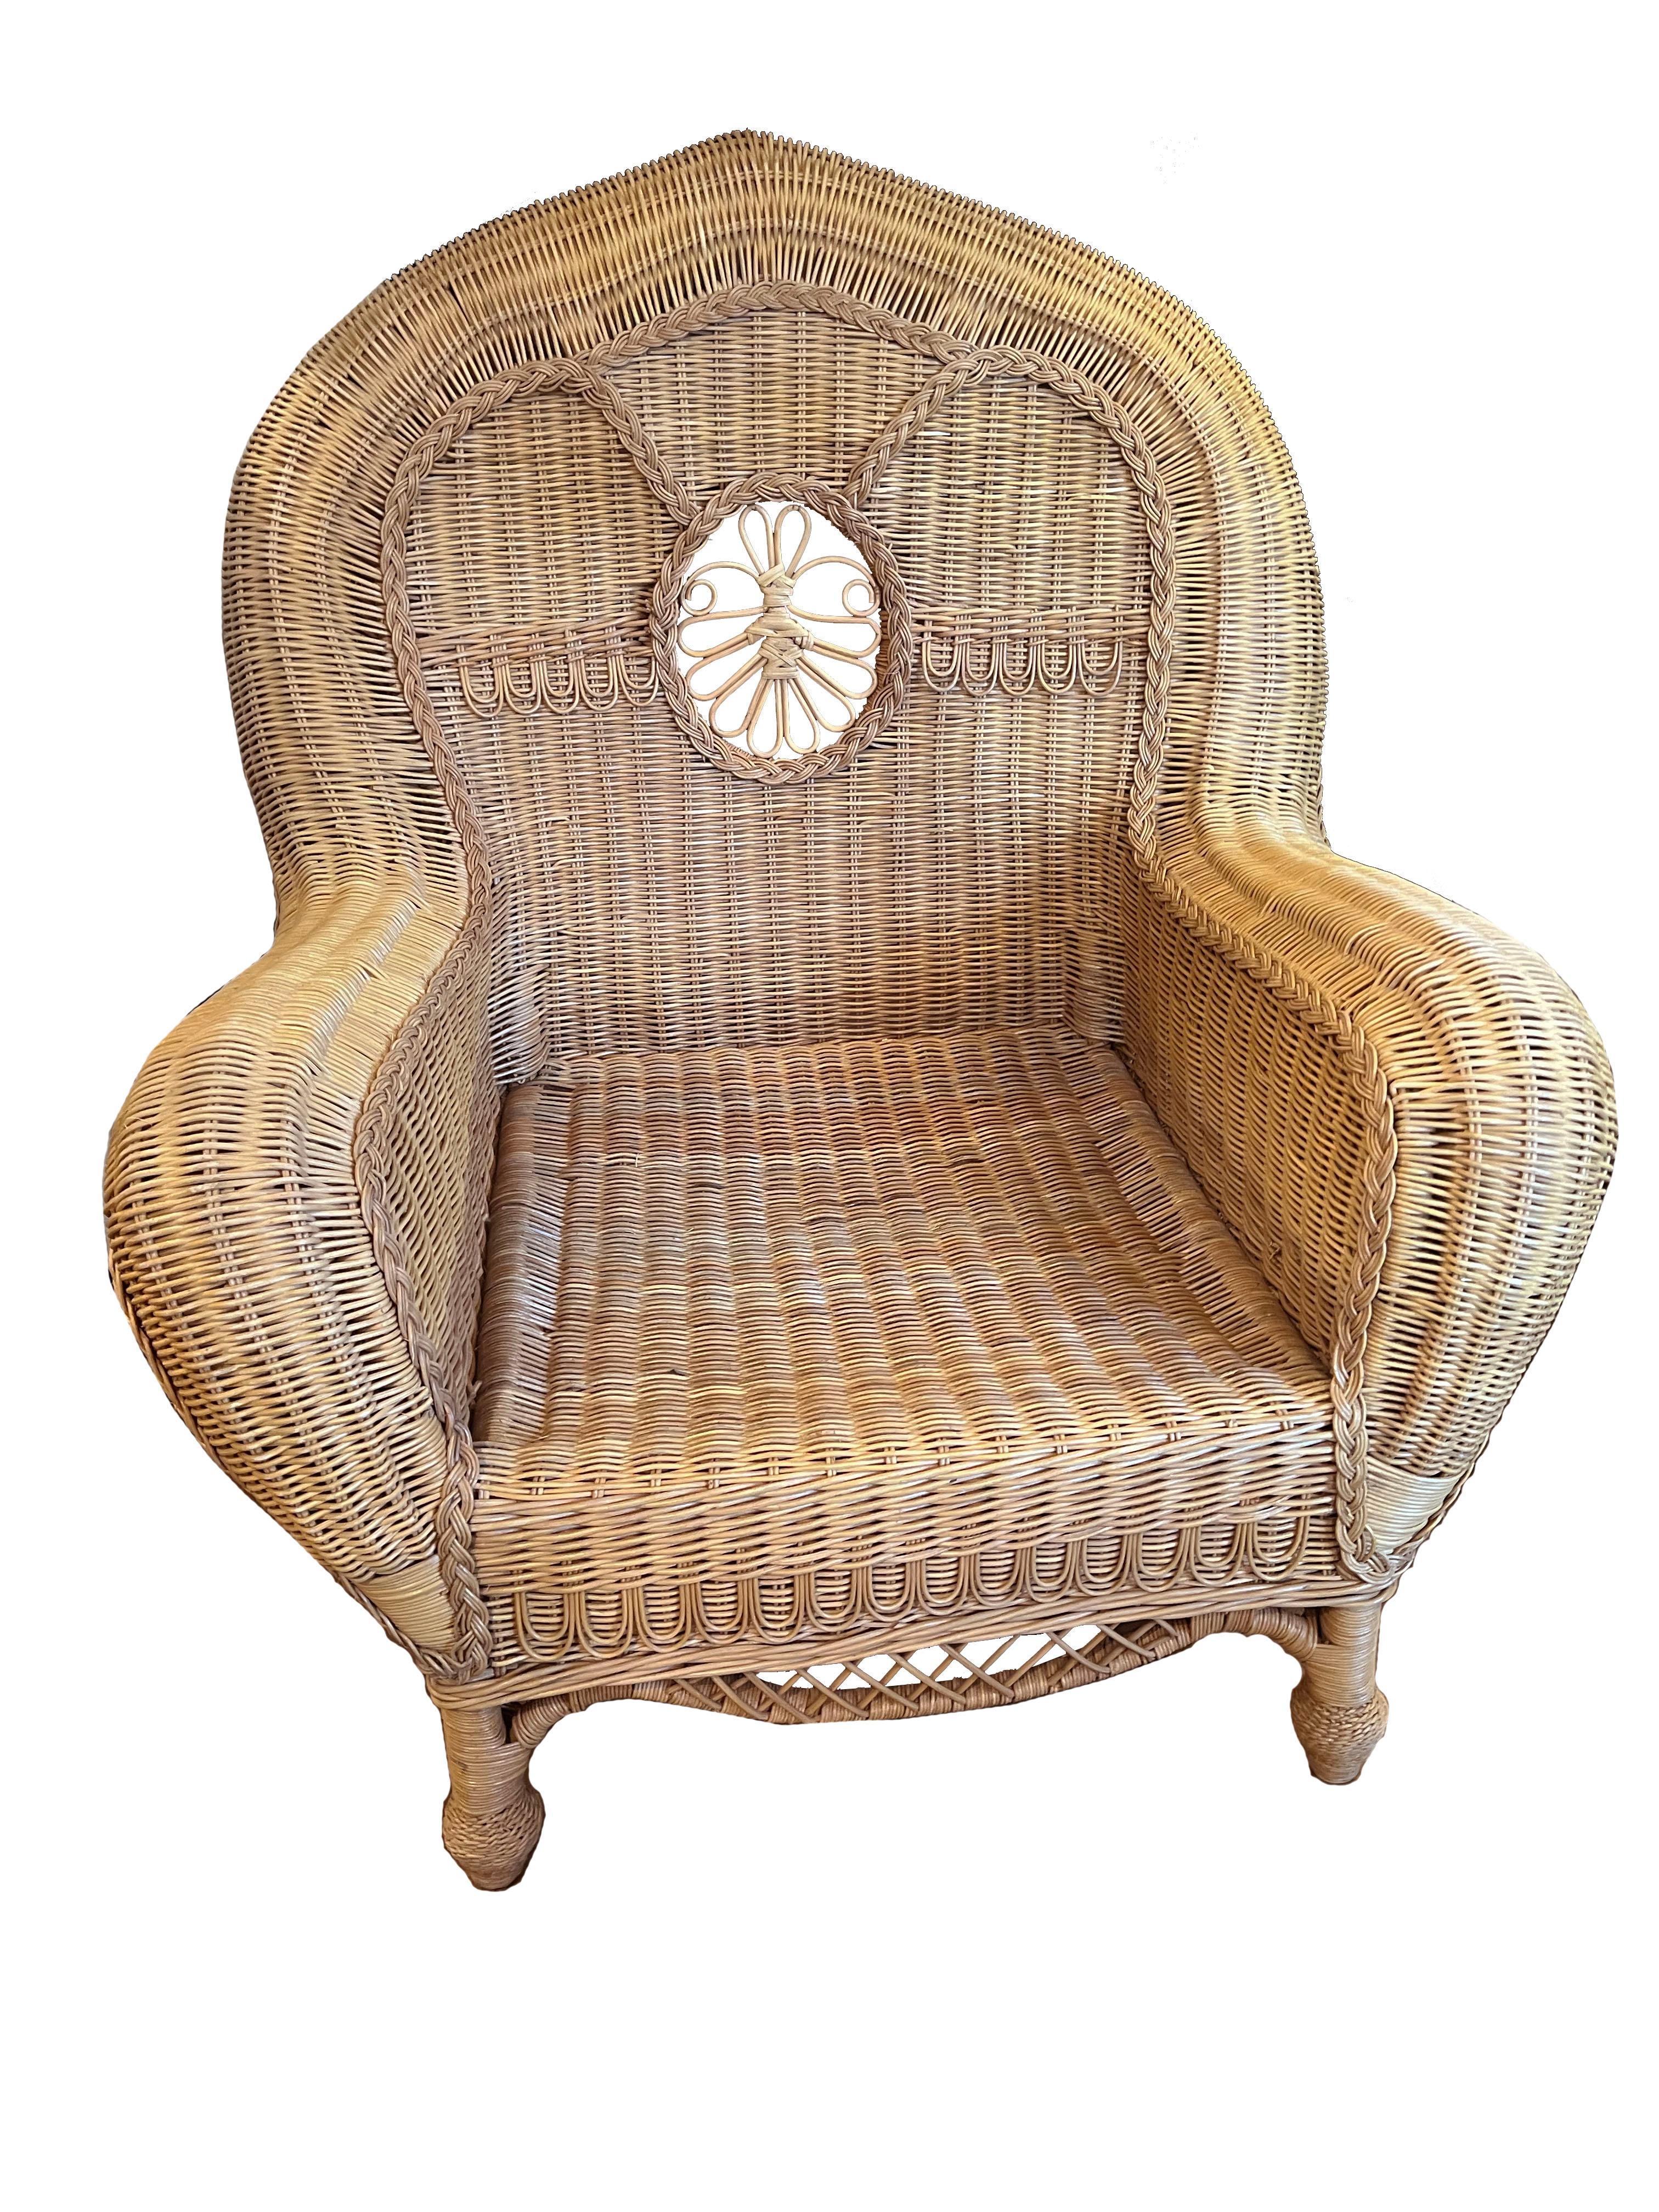 Woven Pair of Large Wicker Armchairs; The Collection of Andre Leon Talley For Sale